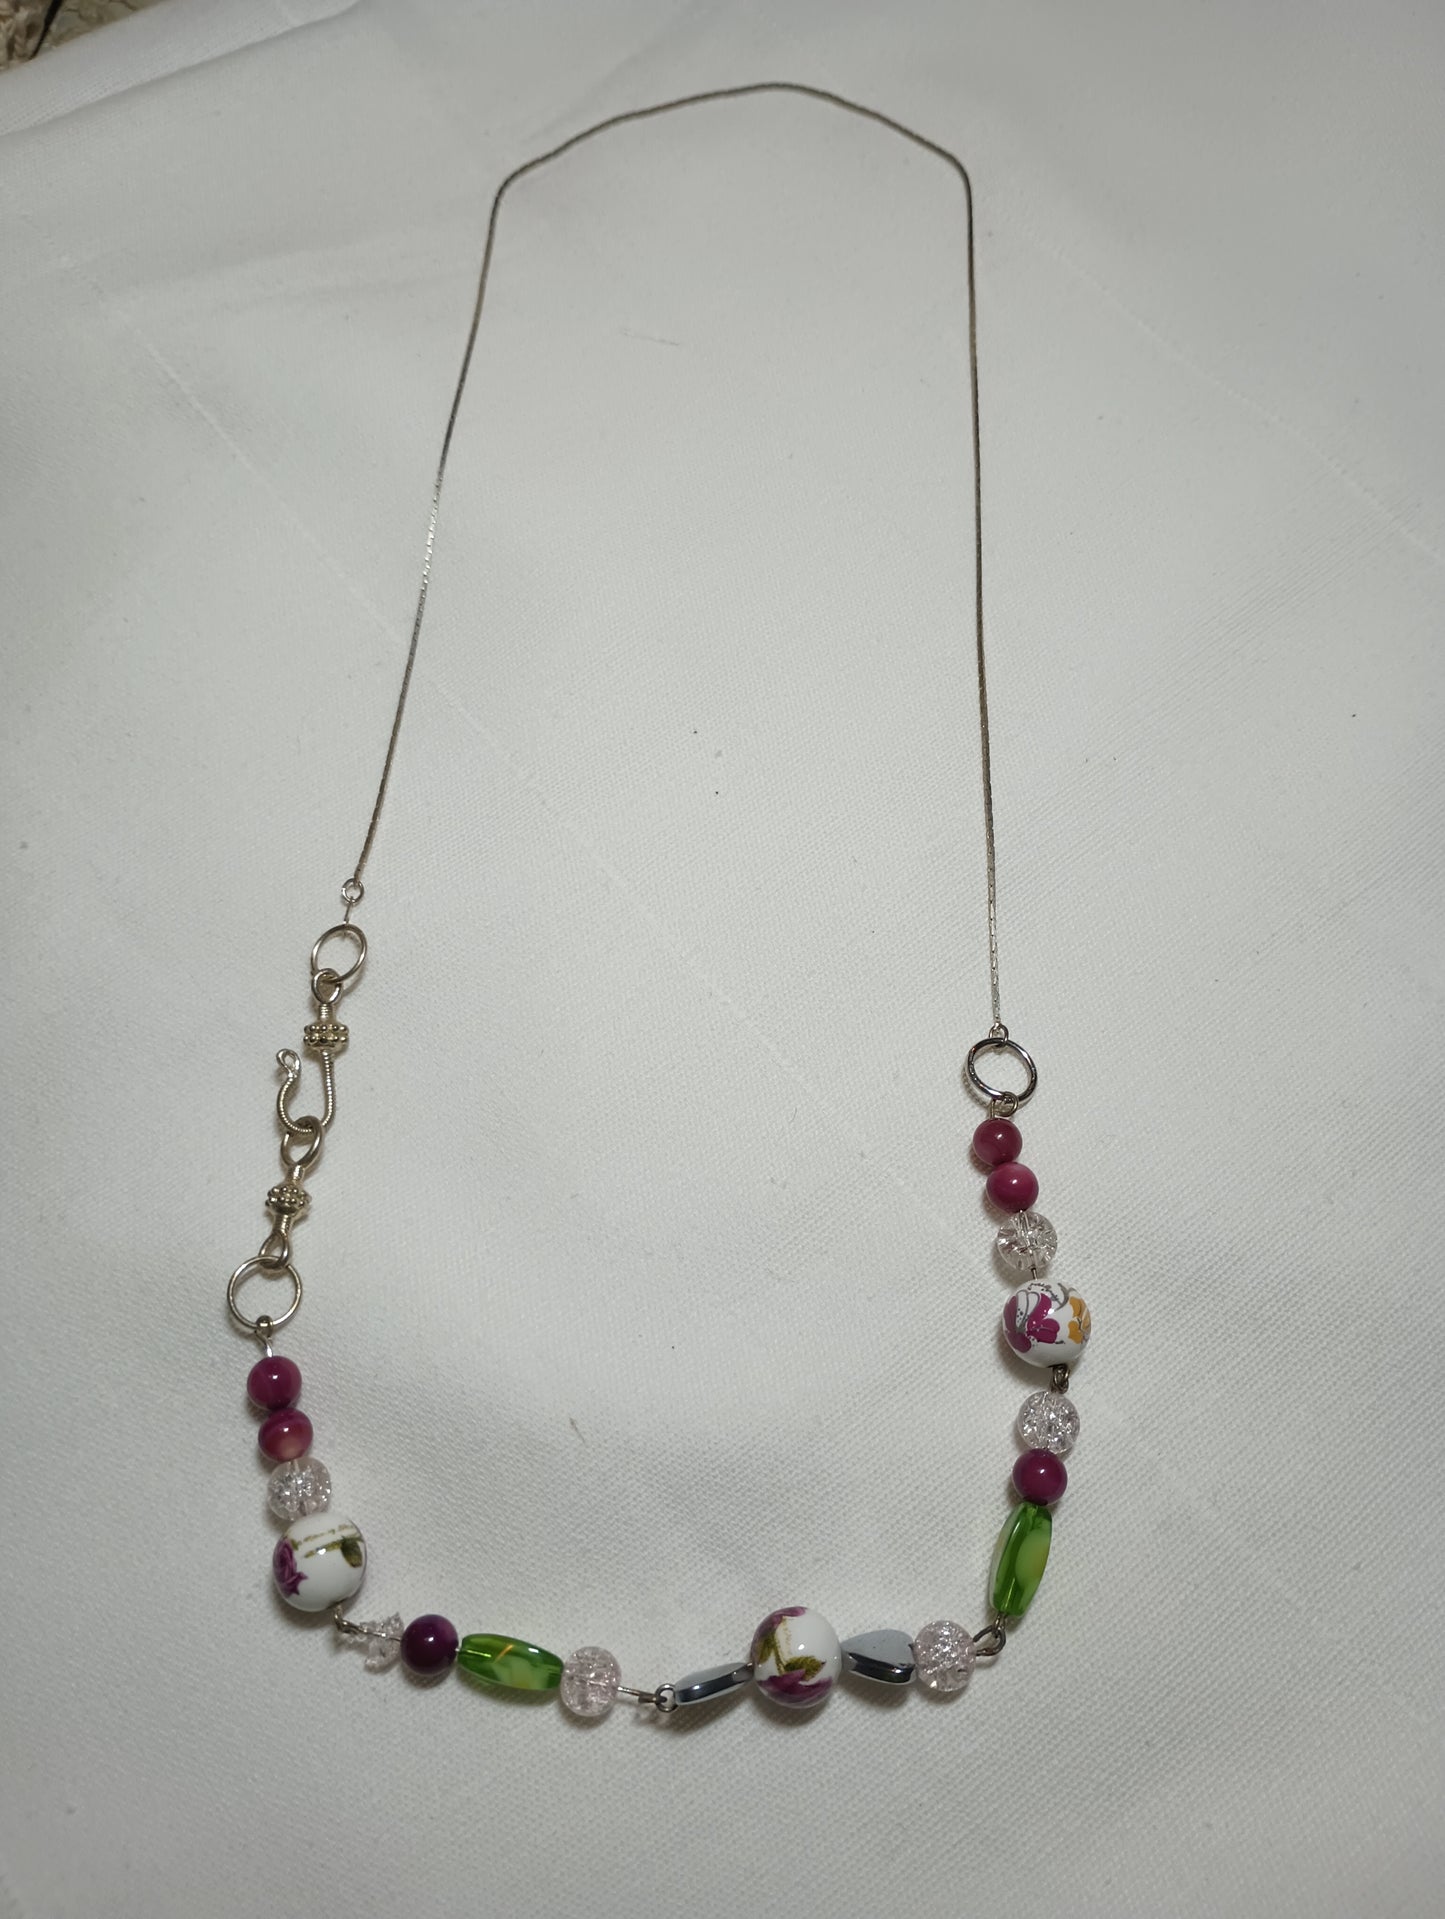 Glass Bead and Chain Necklace, Original Design, One-of-a-kind